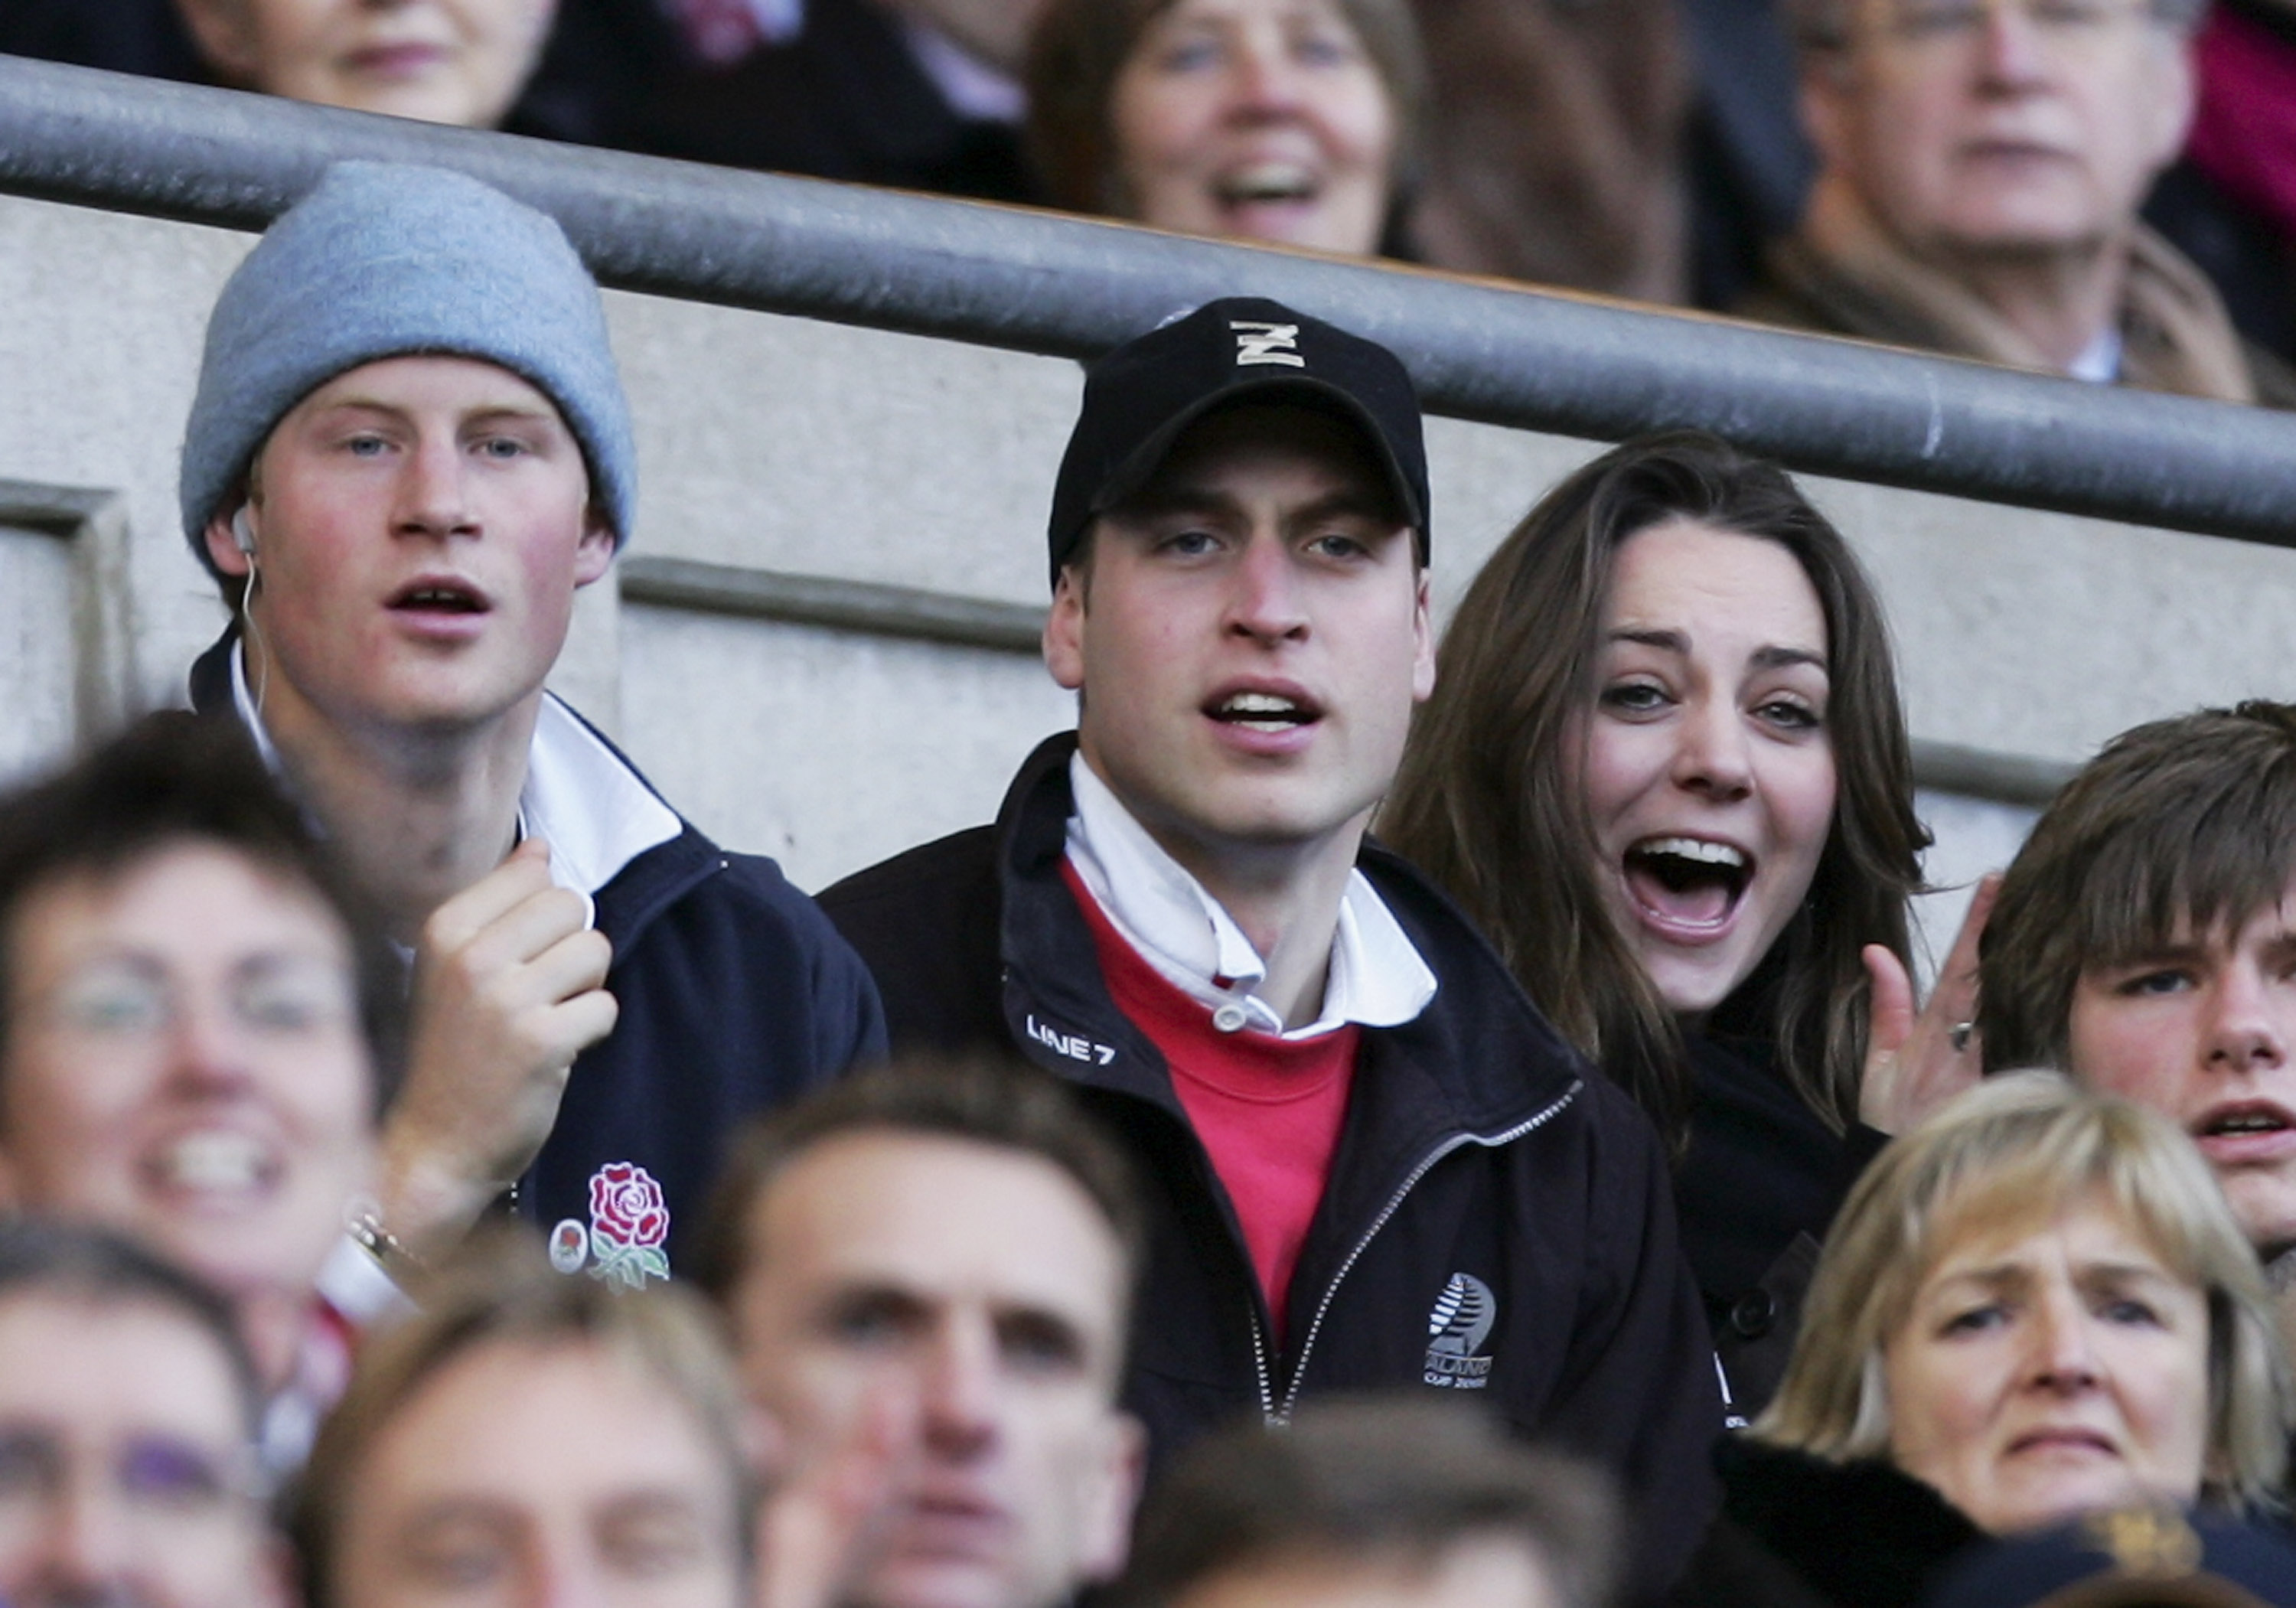 Prince Harry, Prince William, and Kate Middleton at the RBS Six Nations Championship match between England and Italy on February 10, 2007, in London. | Source: Getty Images